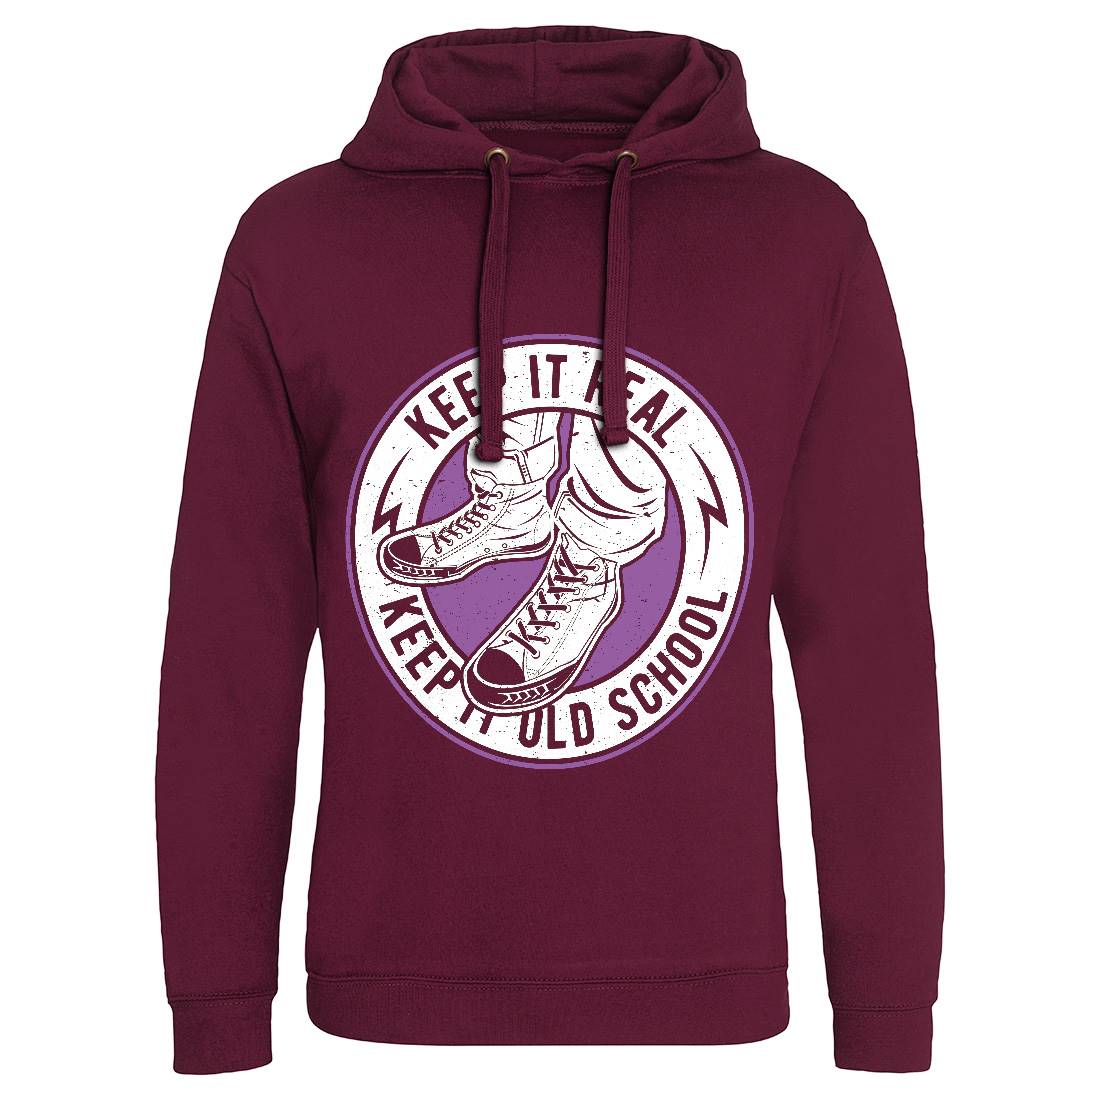 Keep It Old School Mens Hoodie Without Pocket Retro A074